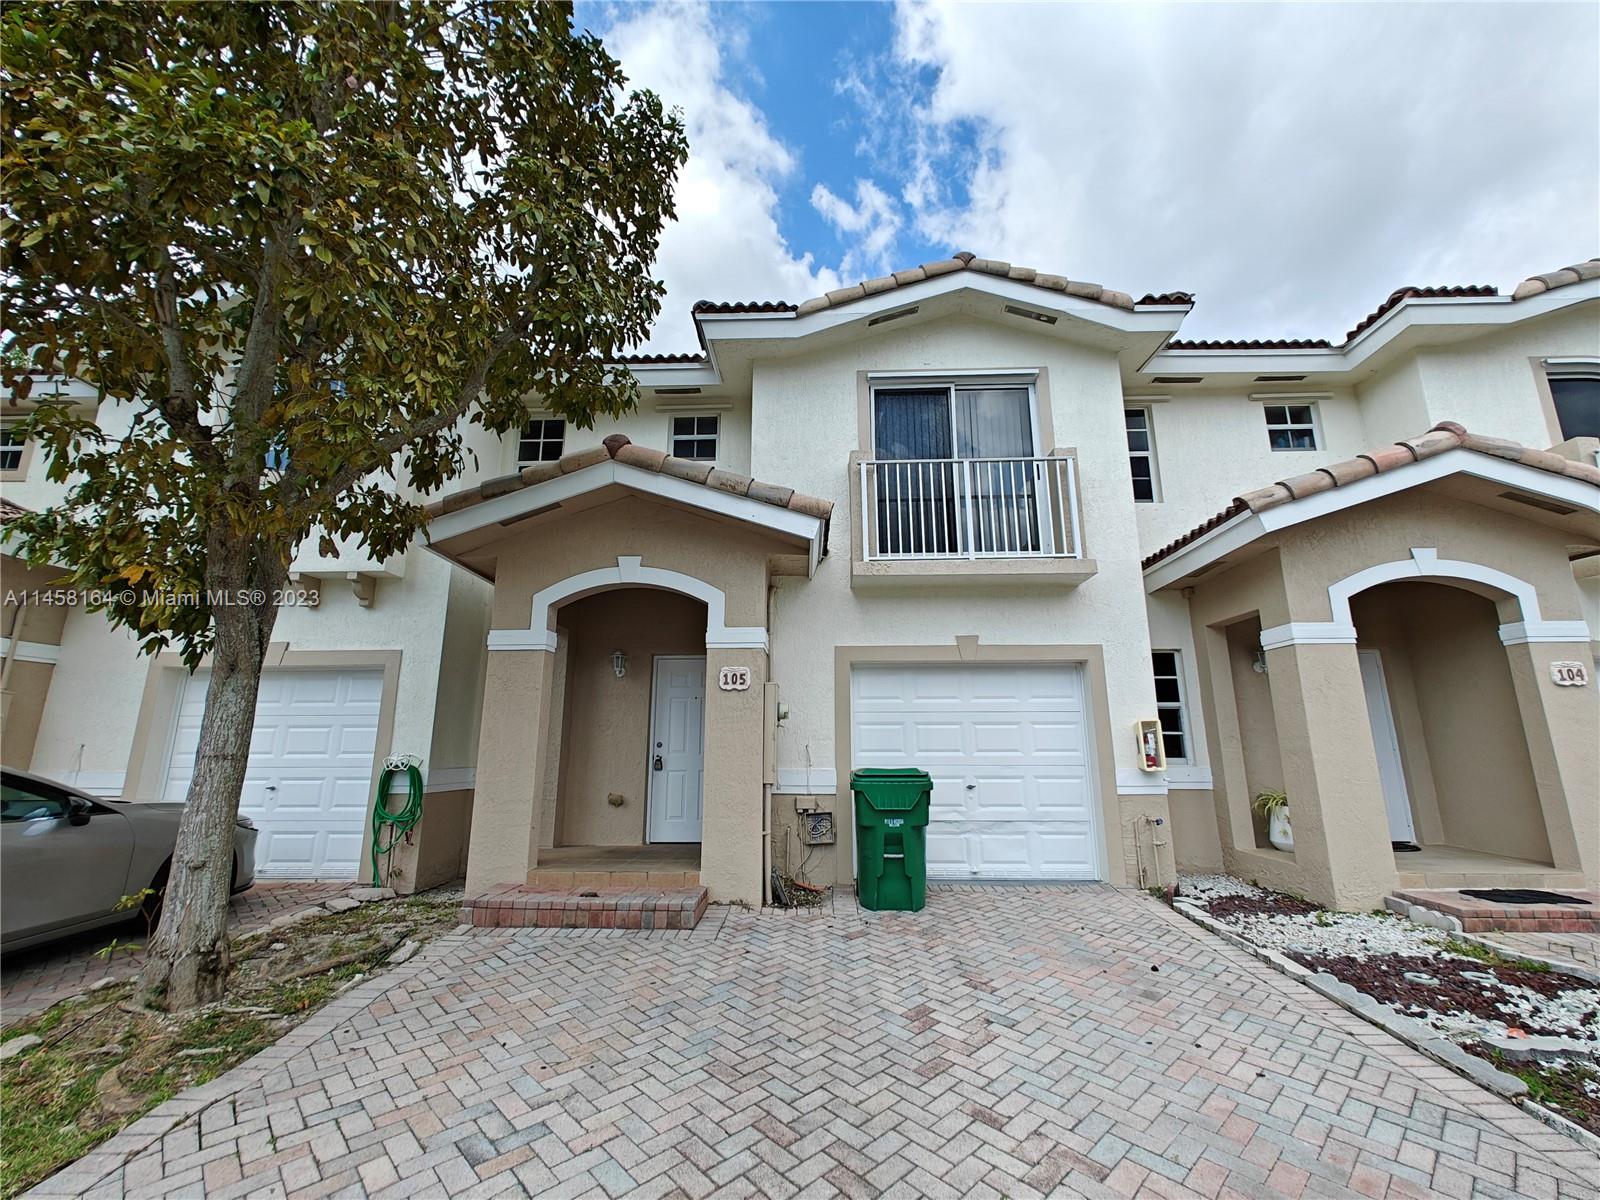 Spacious 2-story townhouse, 3-bed/2.5-bath with driveway, one-car garage and washer/dryer. Private community with gated entry, security patrol, swimming pool, clubhouse and gym. First month and 2 security deposits required for entry. Tenants responsible for all utilities separately.